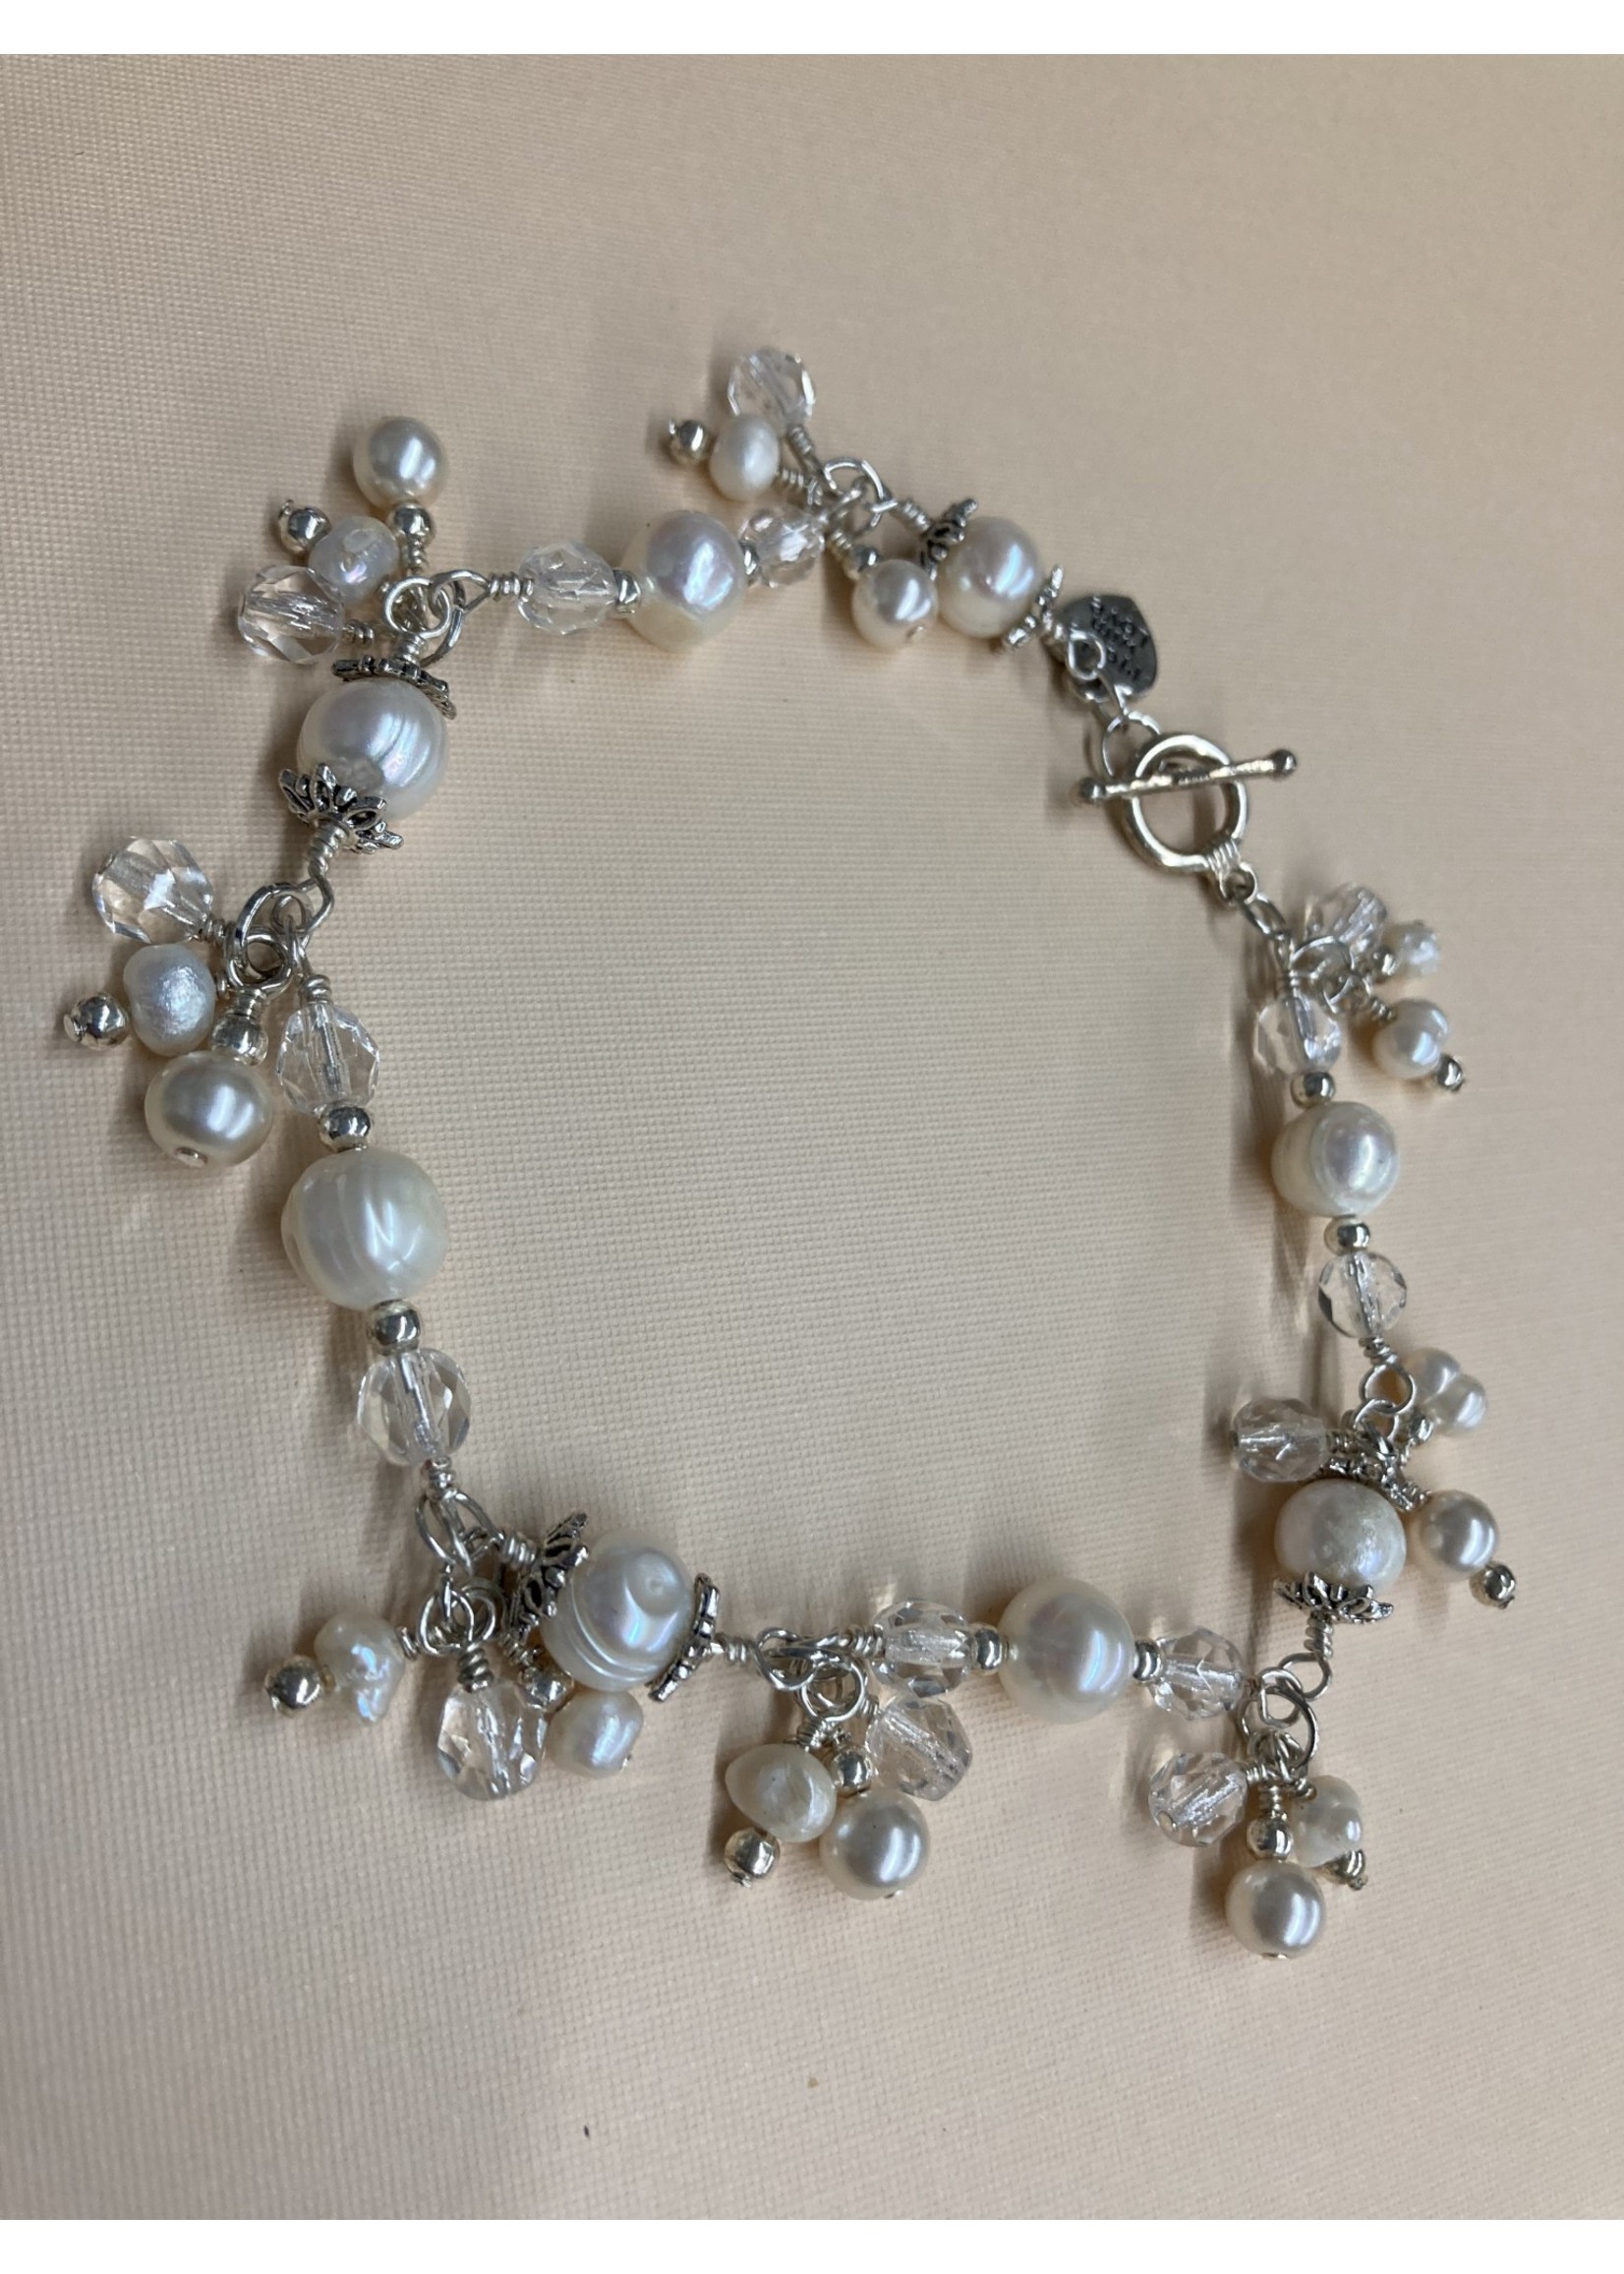 Our Twisted Dahlia B014 Freshwater Pearls with Clear Crystals and Silver Accent Bracelet